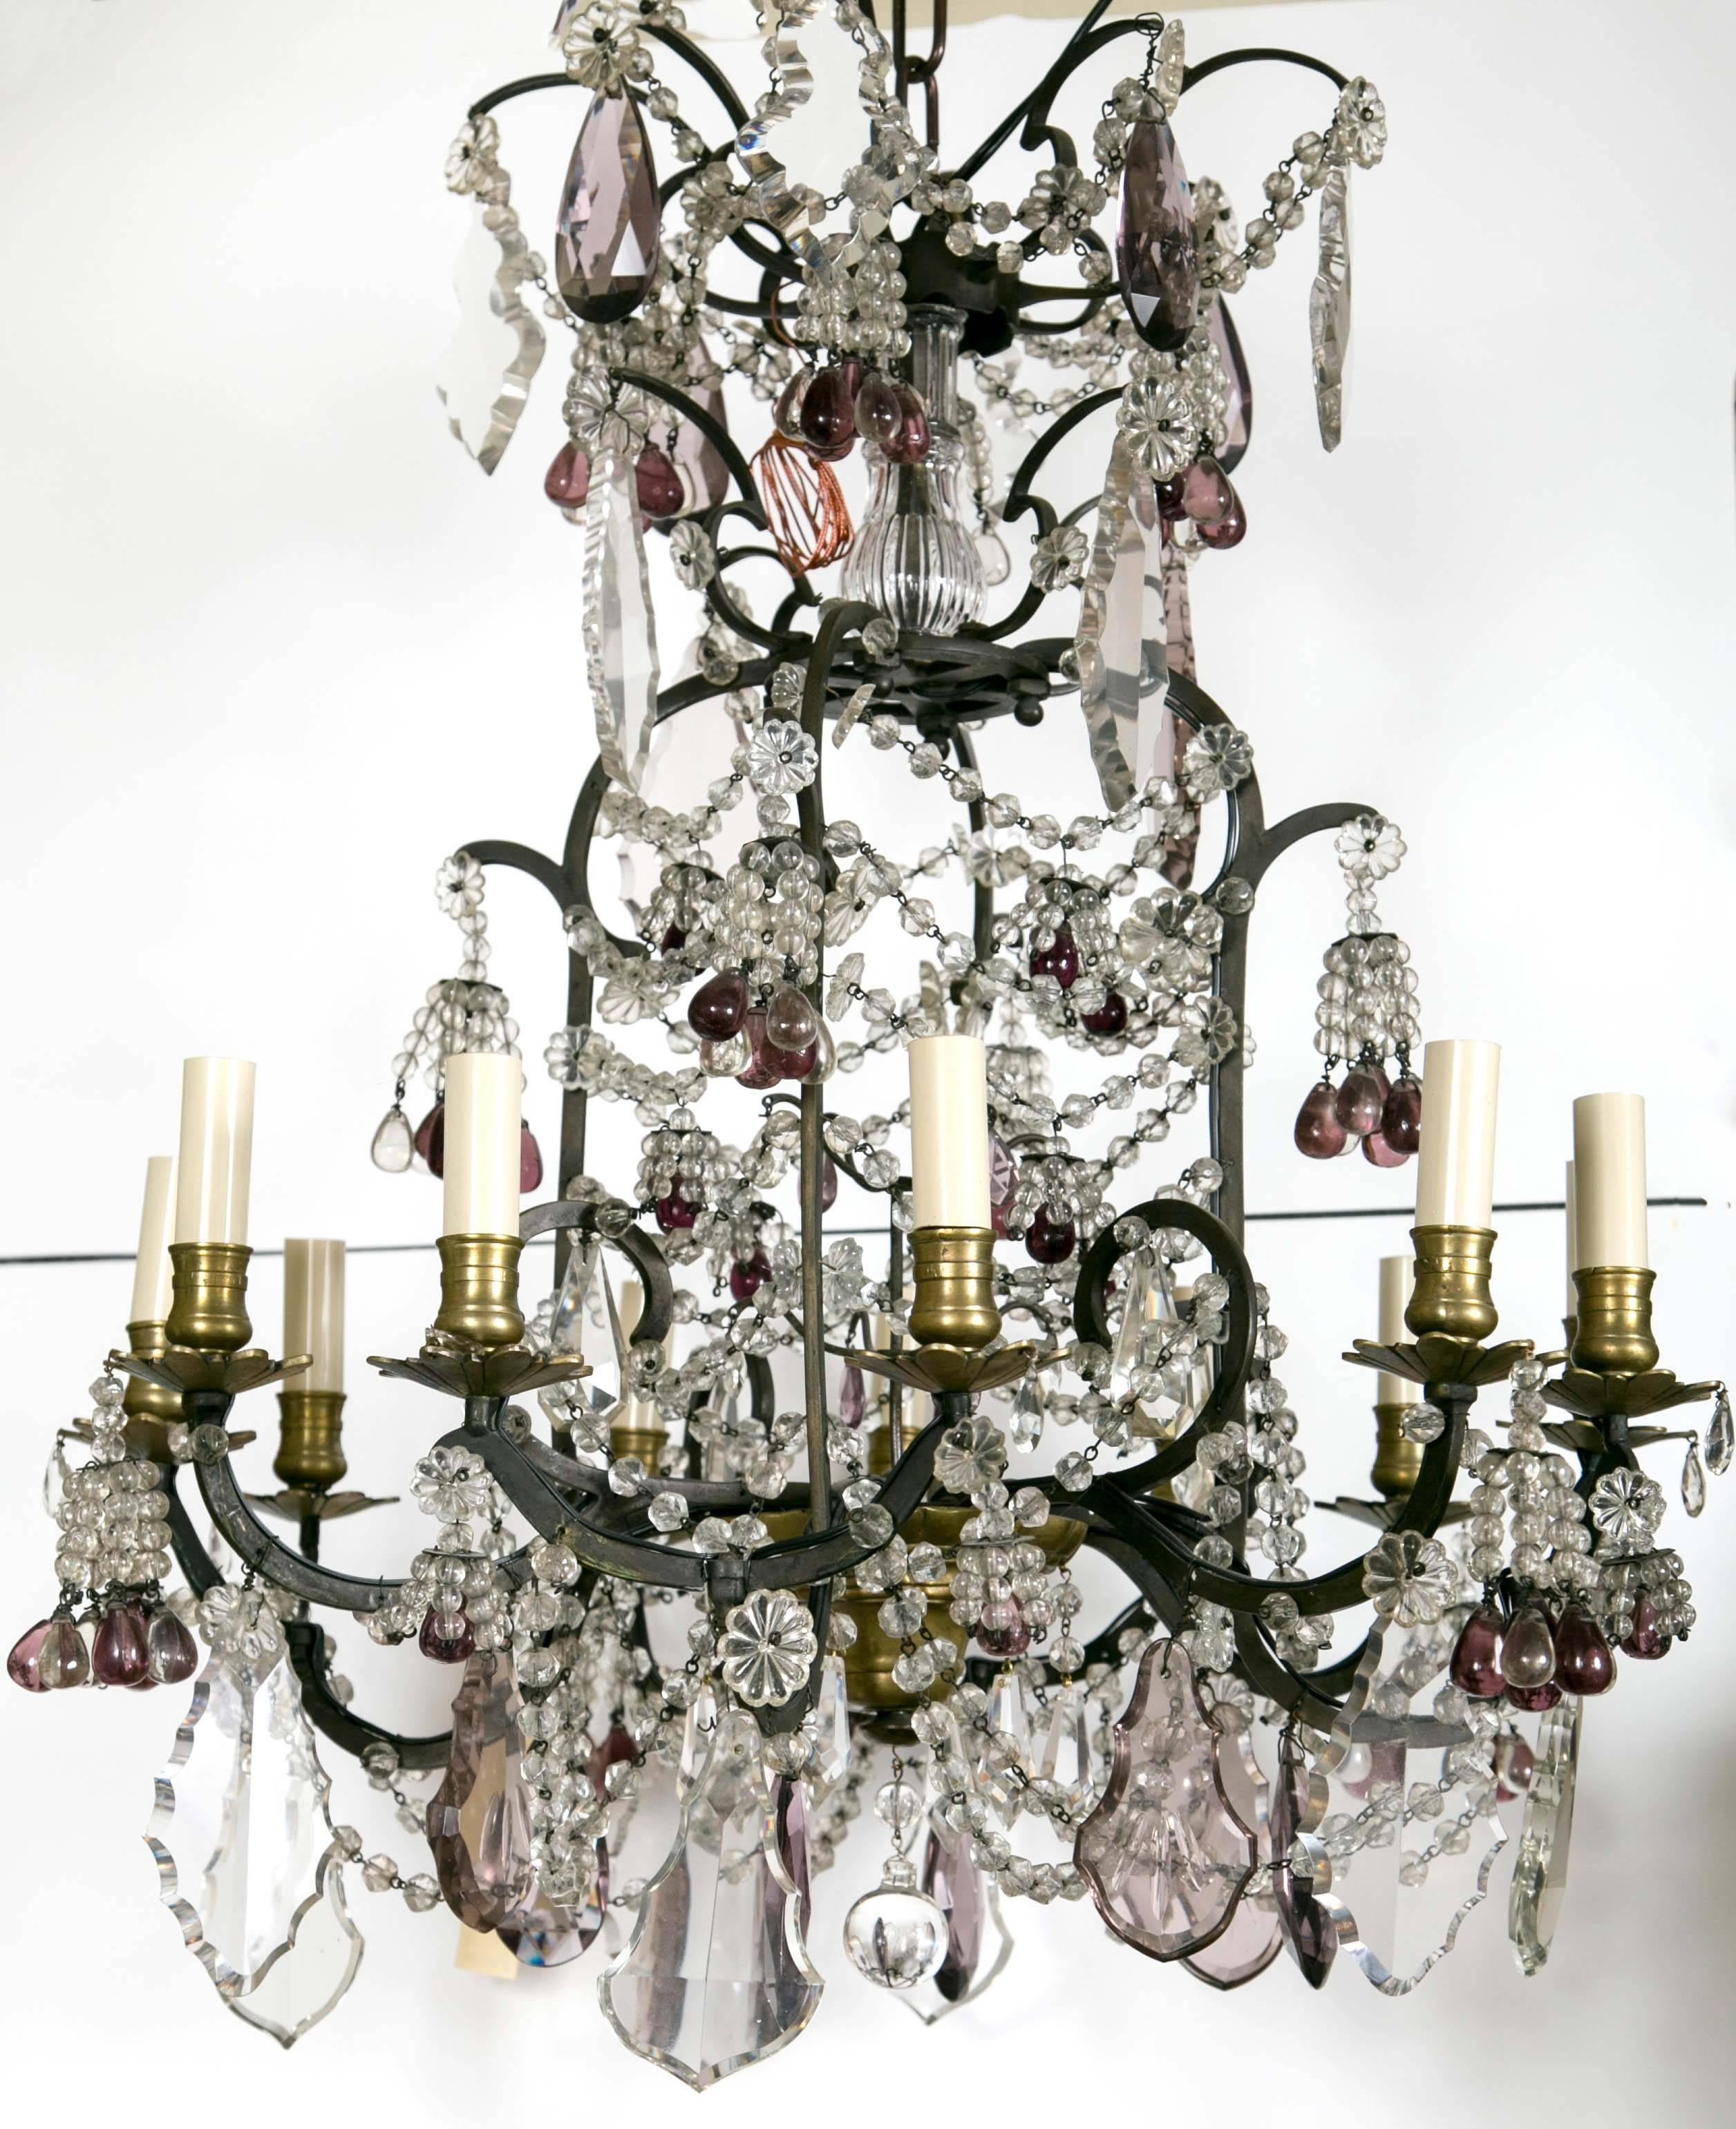 This chandelier is of iron with brass candle cups, baubeches and lower finial.
Each arm (six) projects from the cage and each has two arms which carry the lights. The wiring in outside of the arms.
Clear and pale lavender glass drops of varying